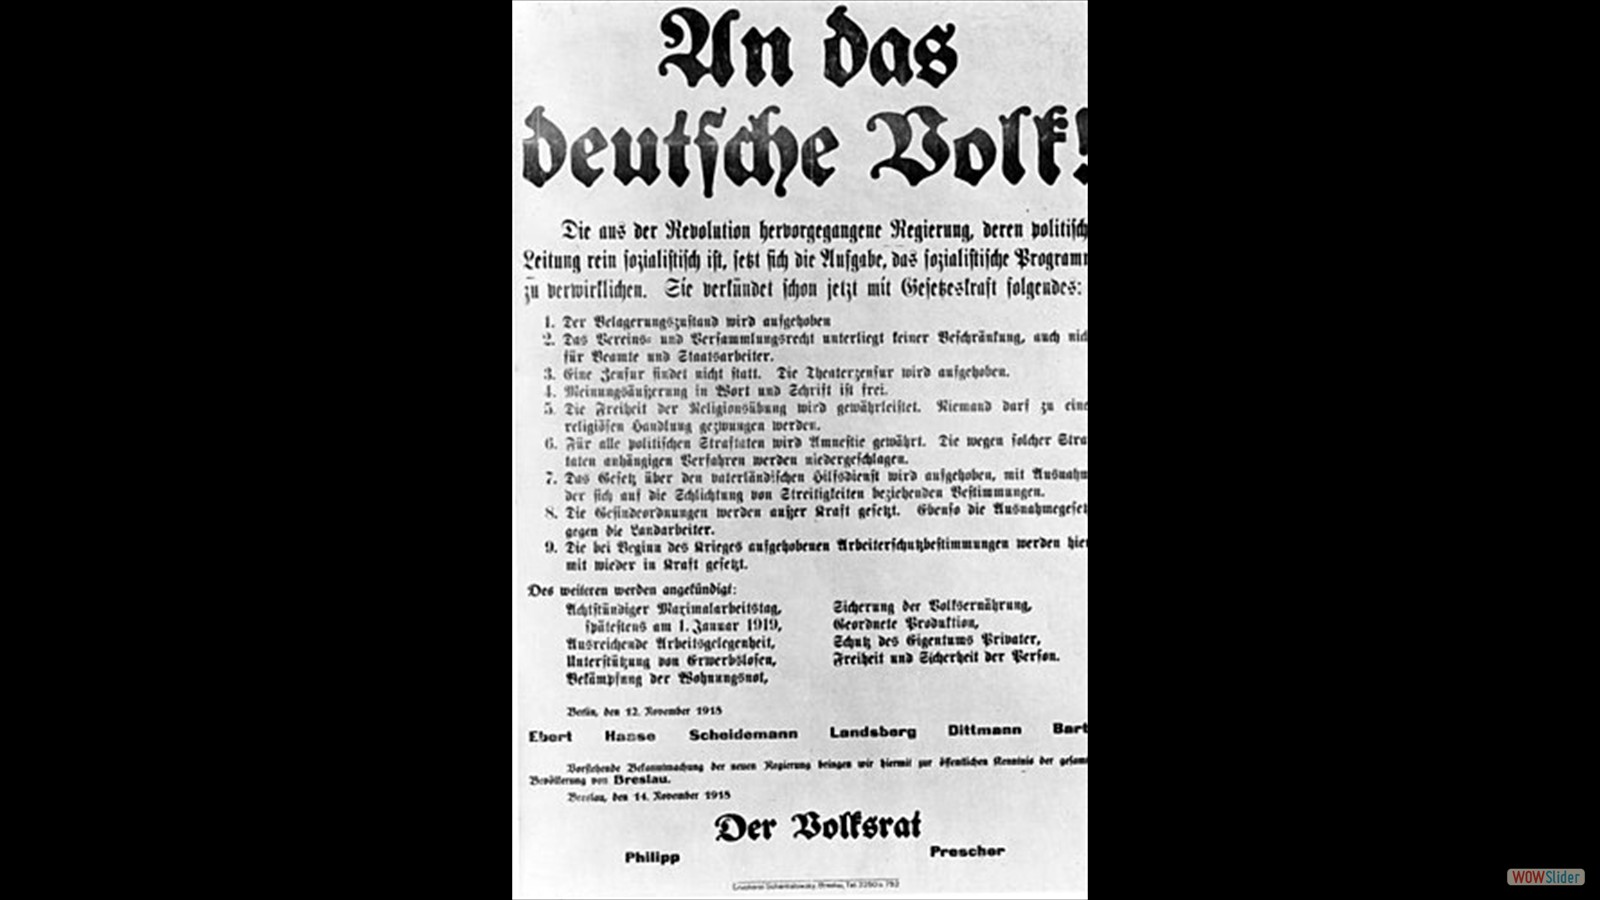 Announcement poster of the revolutionary government of November 12, signed by the representative of the Revolutionary Stewards, Emil Barth.